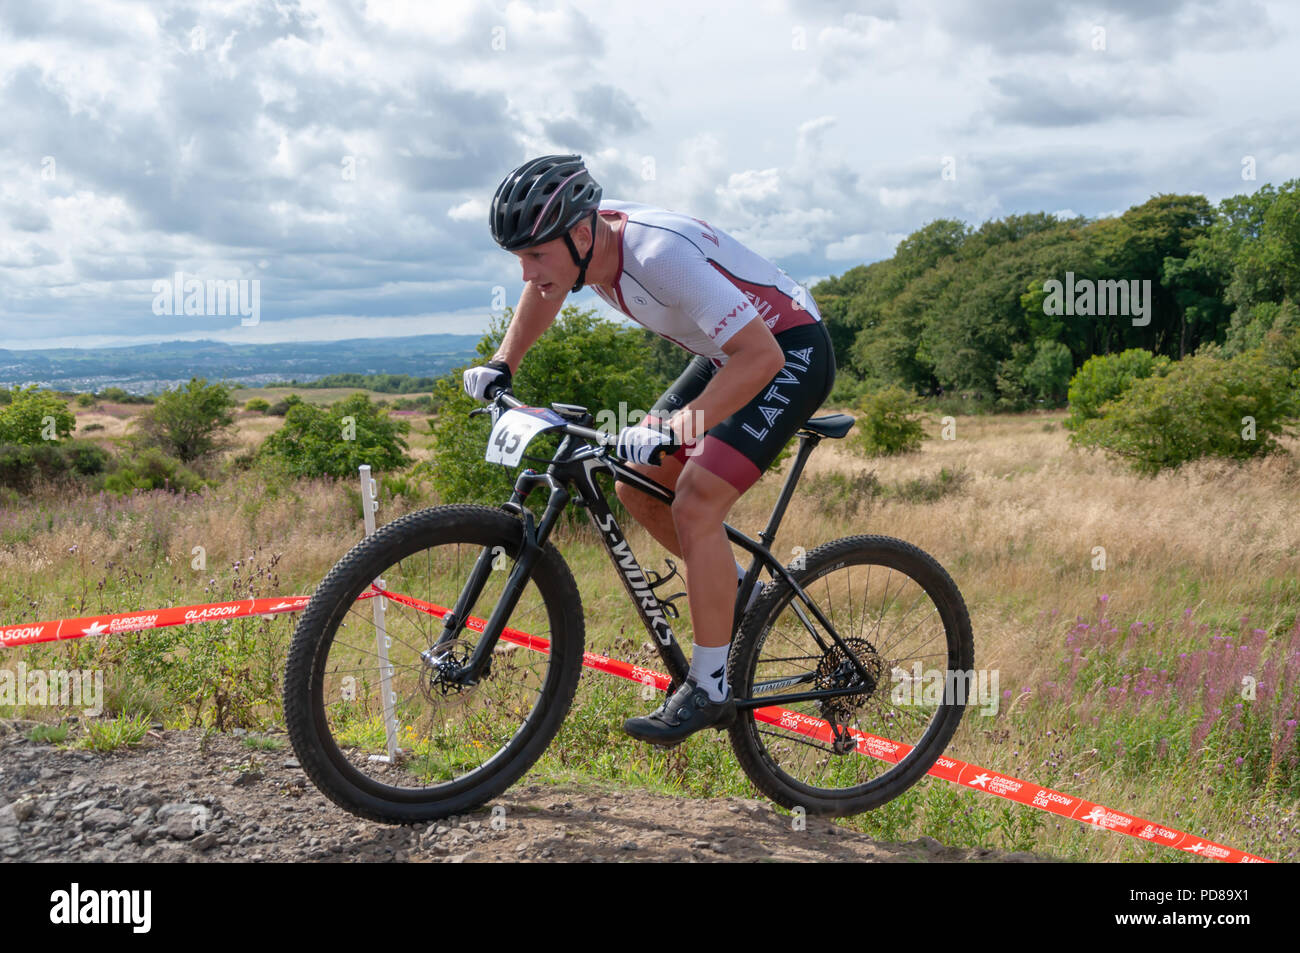 Glasgow, Scotland, UK. 7th August, 2018. Arnis Petersons of Latvia rides in  the Men's Mountain Bike Cross-Country at Cathkin Braes Mountain Bike Trails  on Day Six of the European Championships Glasgow 2018.